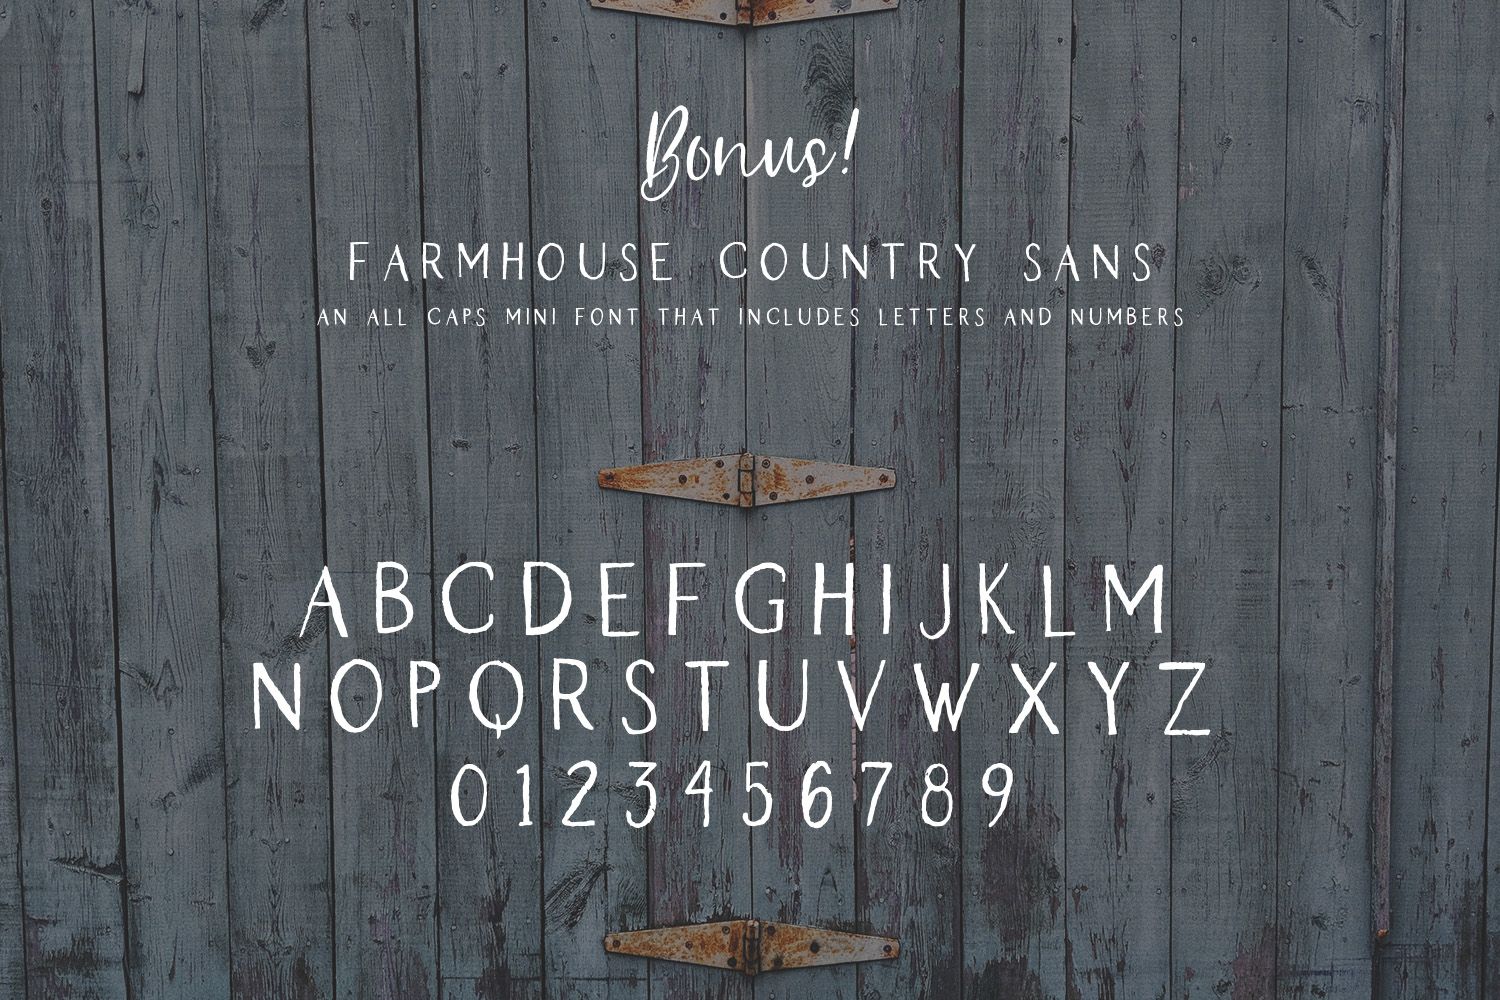 Farmhouse Country Font Free Download